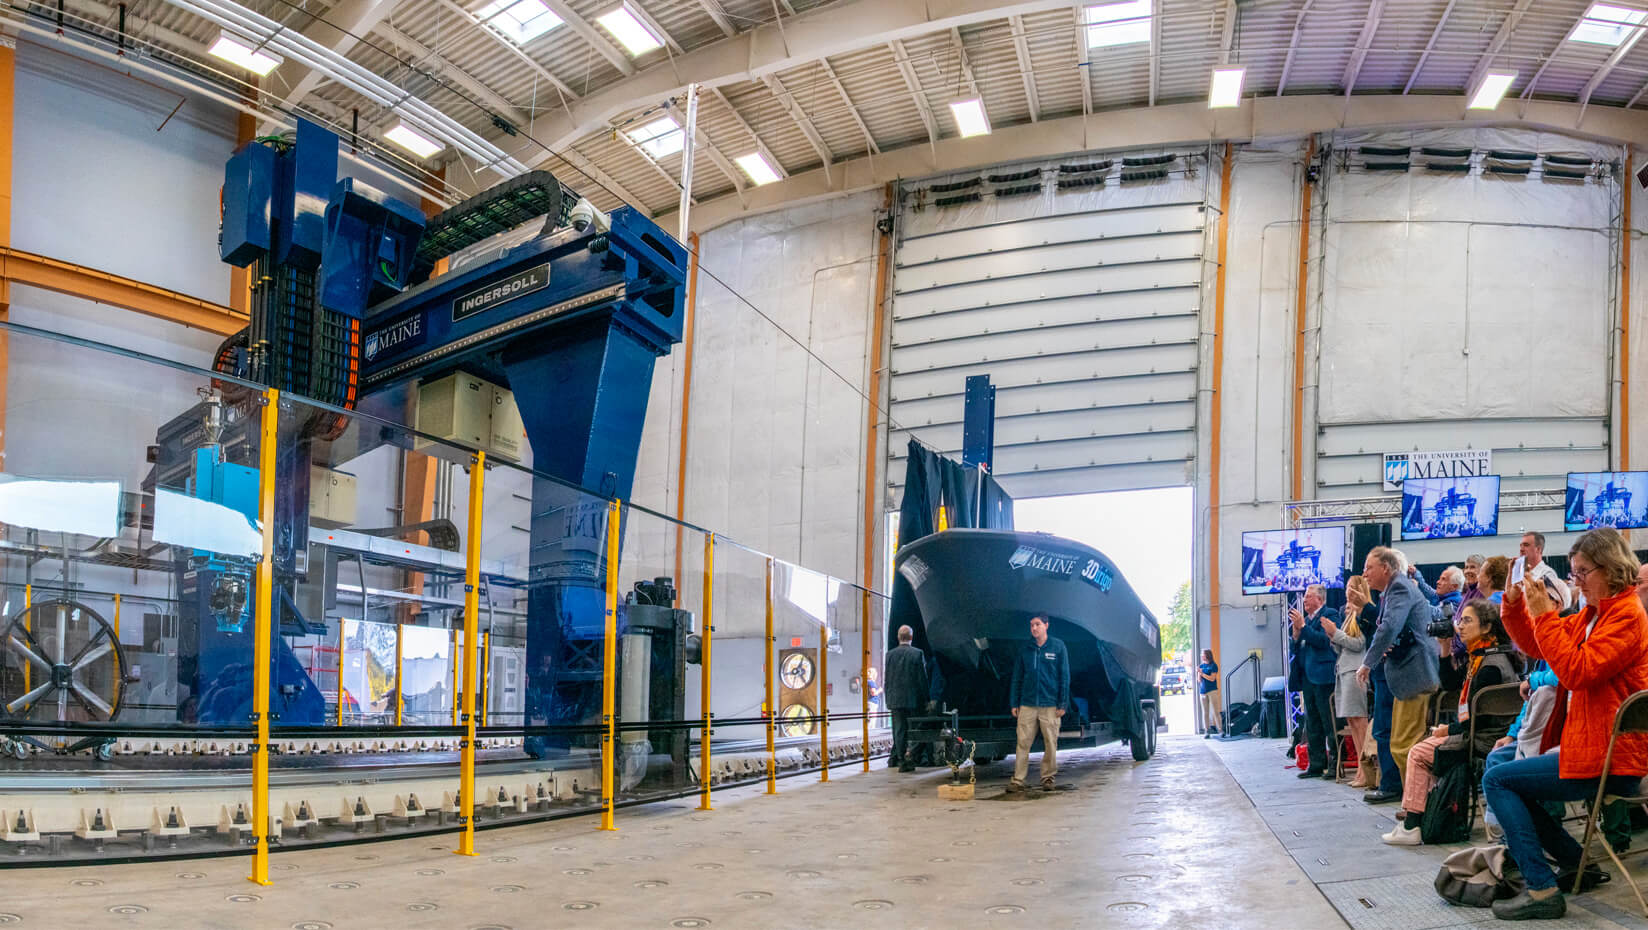 The University of Maine has printed the largest additive manufactured (AM) boat on the world’s largest prototype polymer 3D printer.